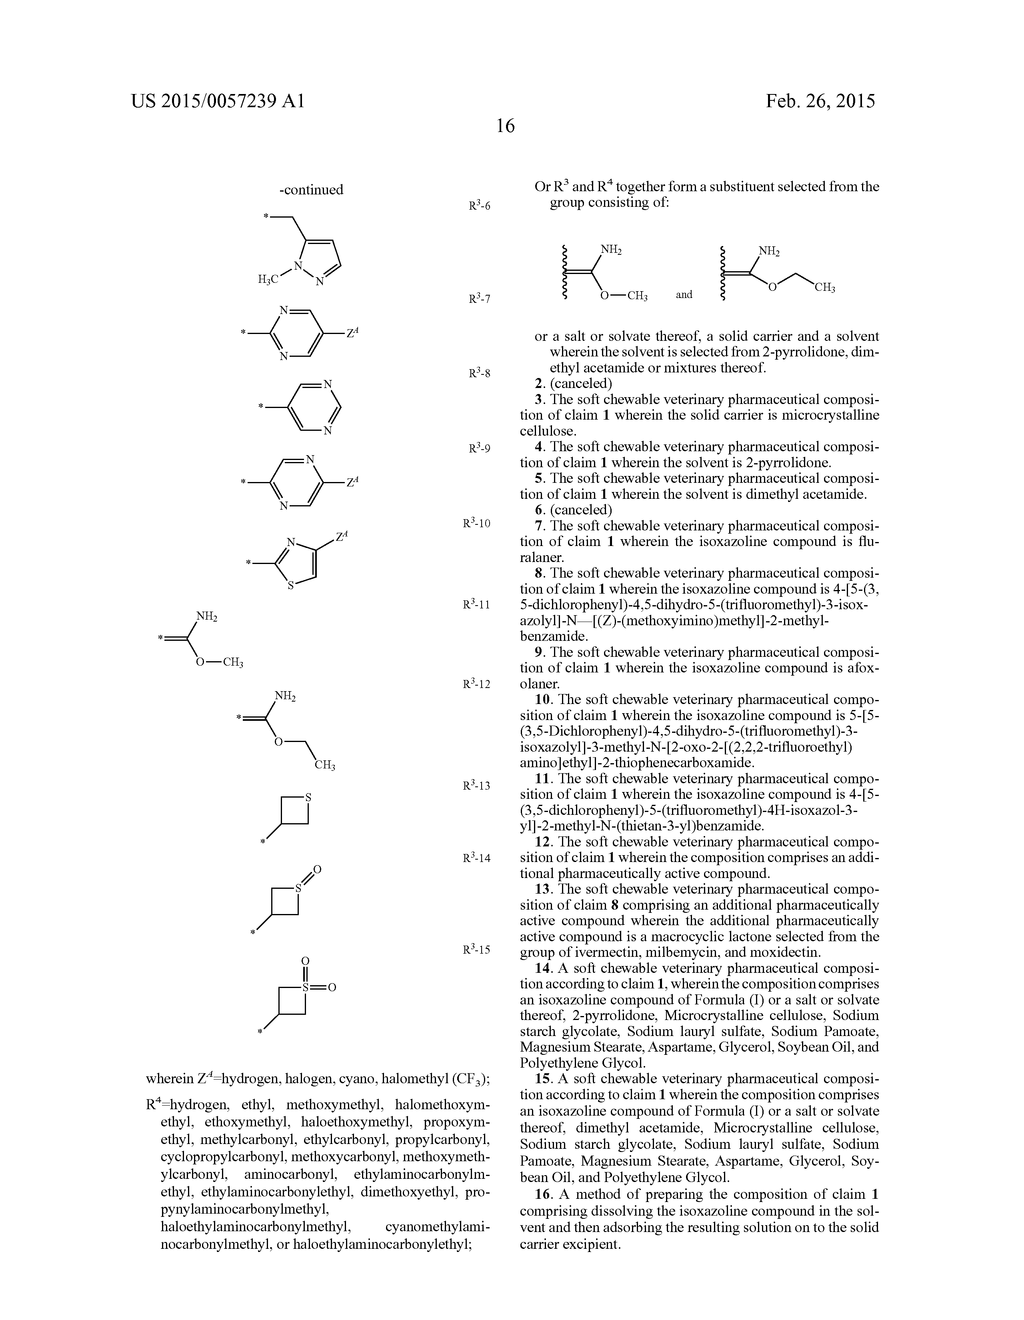 SOLID ORAL PHARMACEUTICAL COMPOSITIONS FOR ISOXAZOLINE COMPOUNDS - diagram, schematic, and image 19